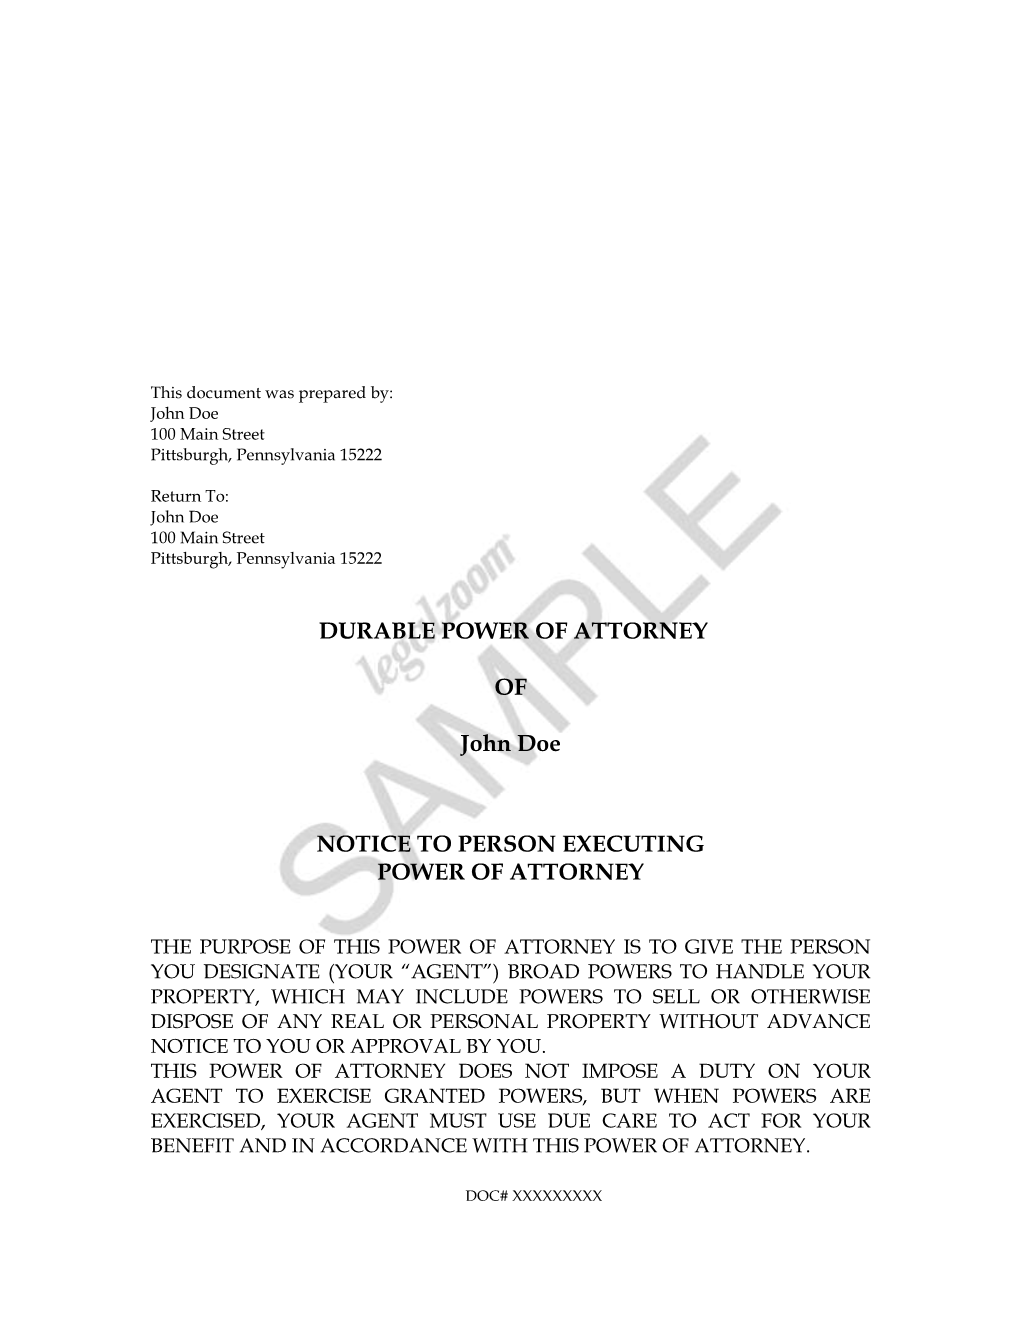 DURABLE POWER of ATTORNEY of John Doe NOTICE to PERSON